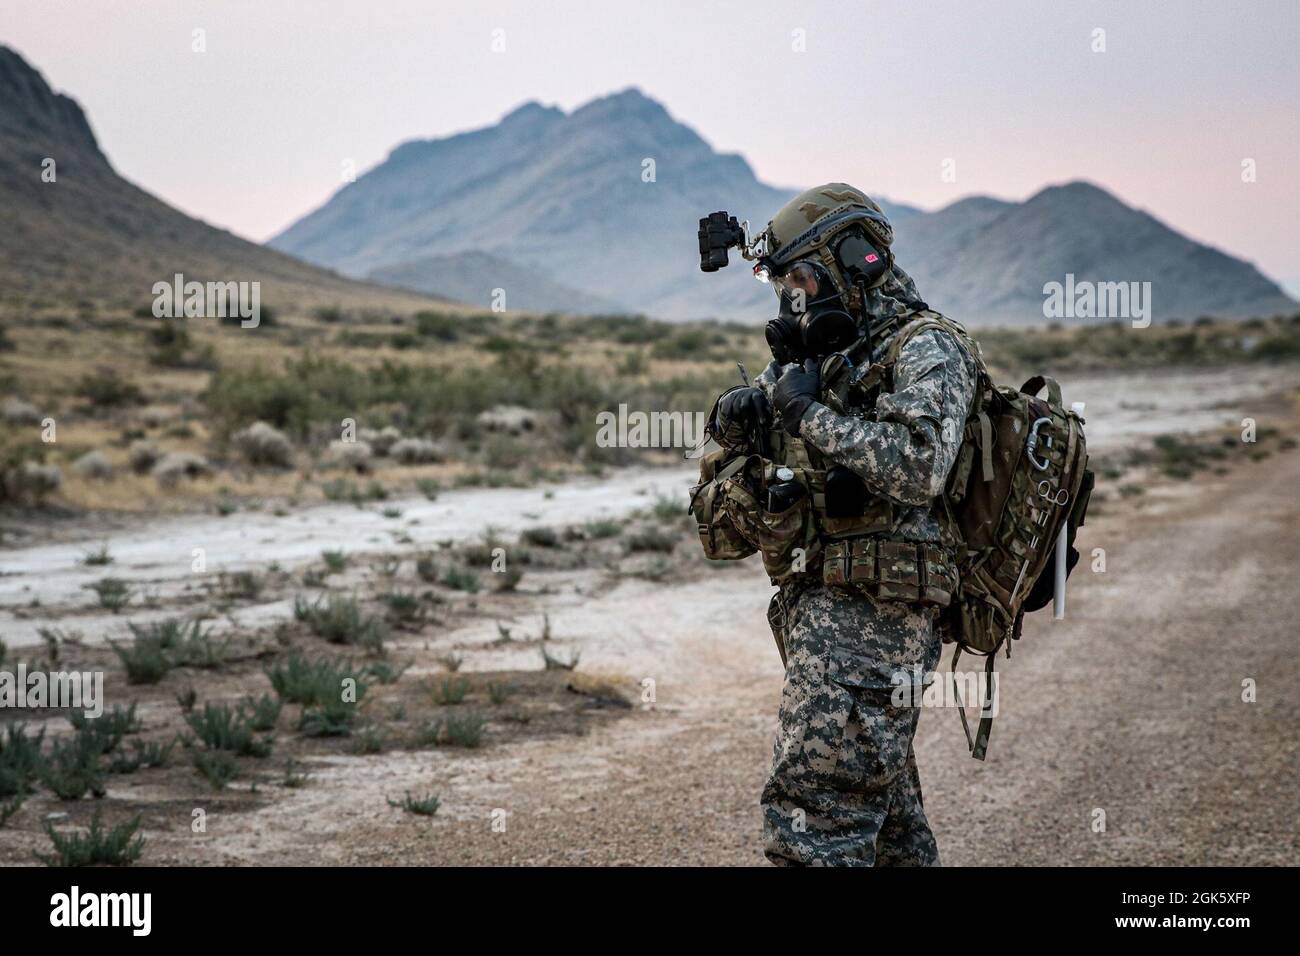 A Soldier from the 56th Chemical Reconnaissance Detachment (CRD), 4th Battlion, 5th Special Forces Group (Airborne), conducts sensitive site exploitation training during their 1st Special Forces Command validation exercise in Dugway, Utah, from Aug. 2, 2021 to Aug. 13, 2021. The exercise evaluates each CRD's technical and tactical skillsets in order to deploy in a combat environment. Stock Photo